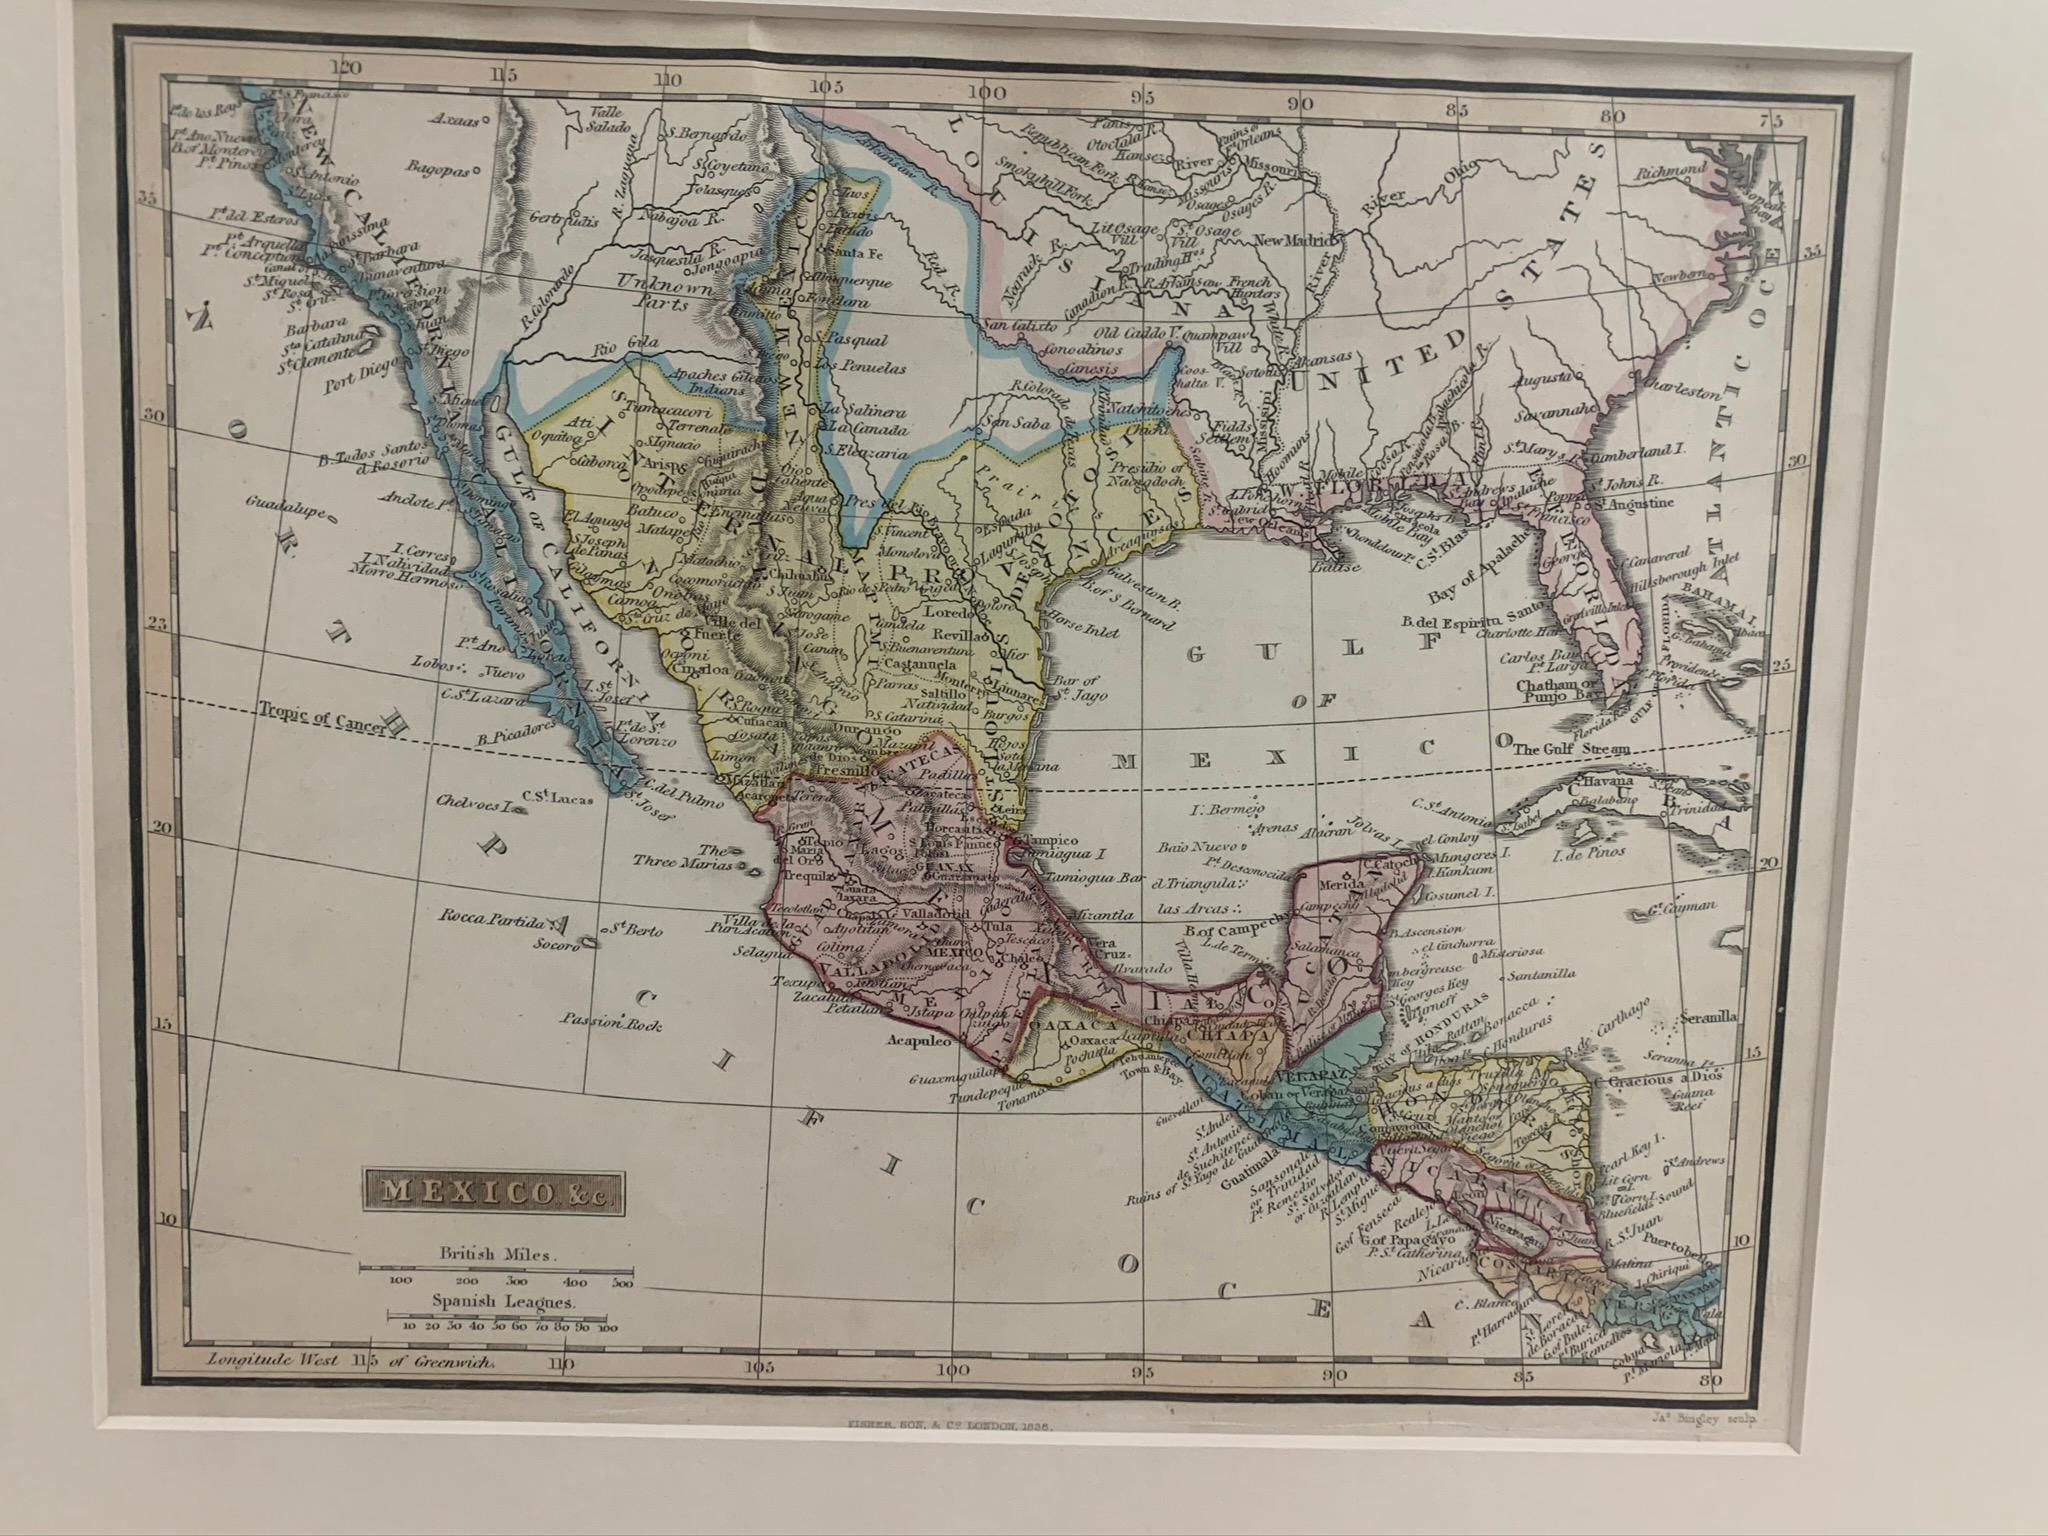 Glass Framed 1838 Mexico & Gulf of Mexico Map For Sale